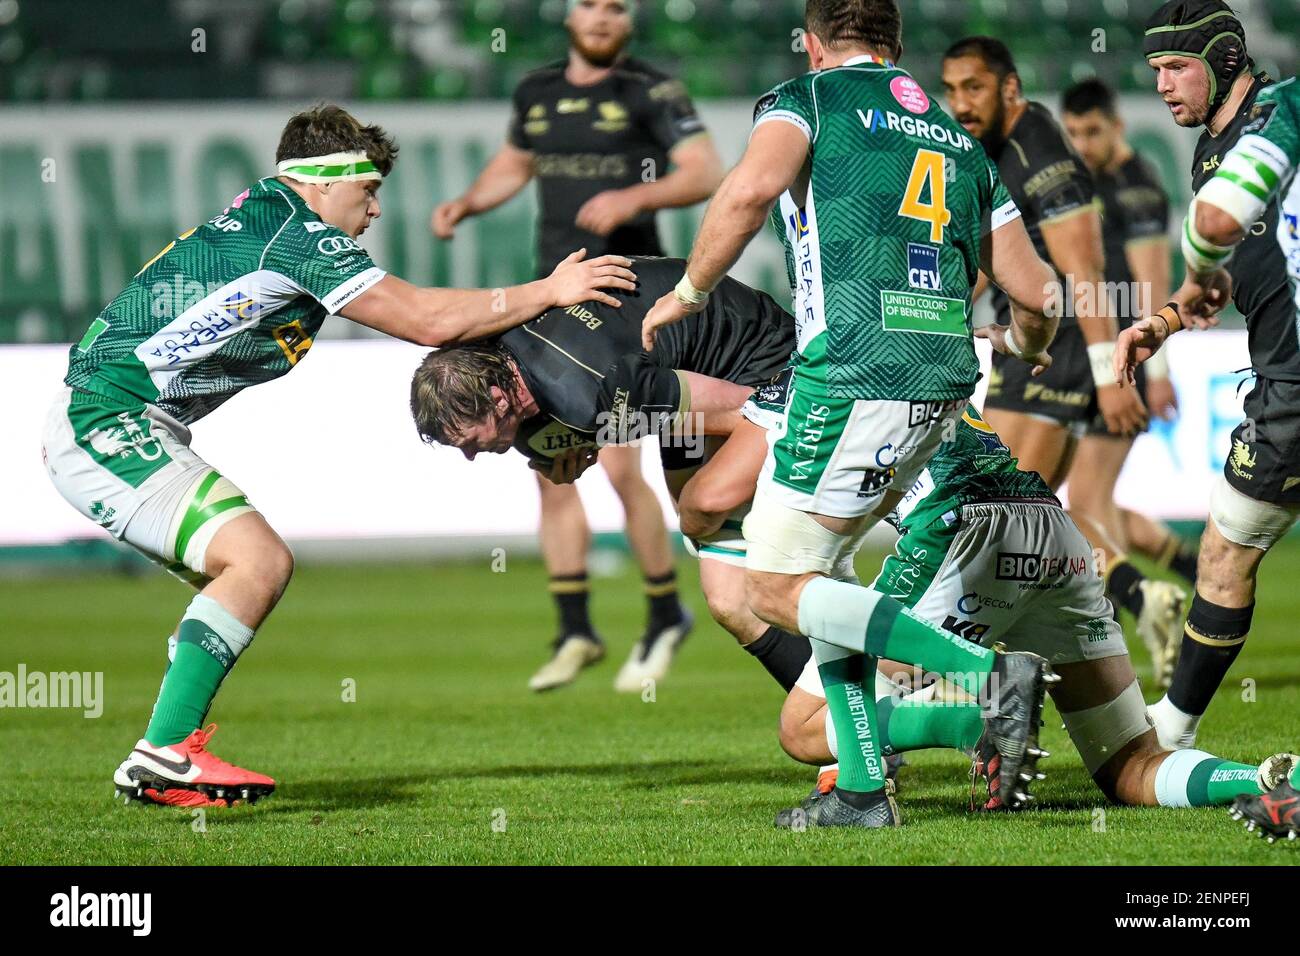 Treviso, Italy. 26th Feb, 2021. Gavin Thornbury (Connacht) tackled by  Dewaldt Duvenage (Benetton Treviso) and Davide Ruggeri (Benetton Treviso)  during Benetton Treviso vs Connacht Rugby, Rugby Guinness Pro 14 match in  Treviso,